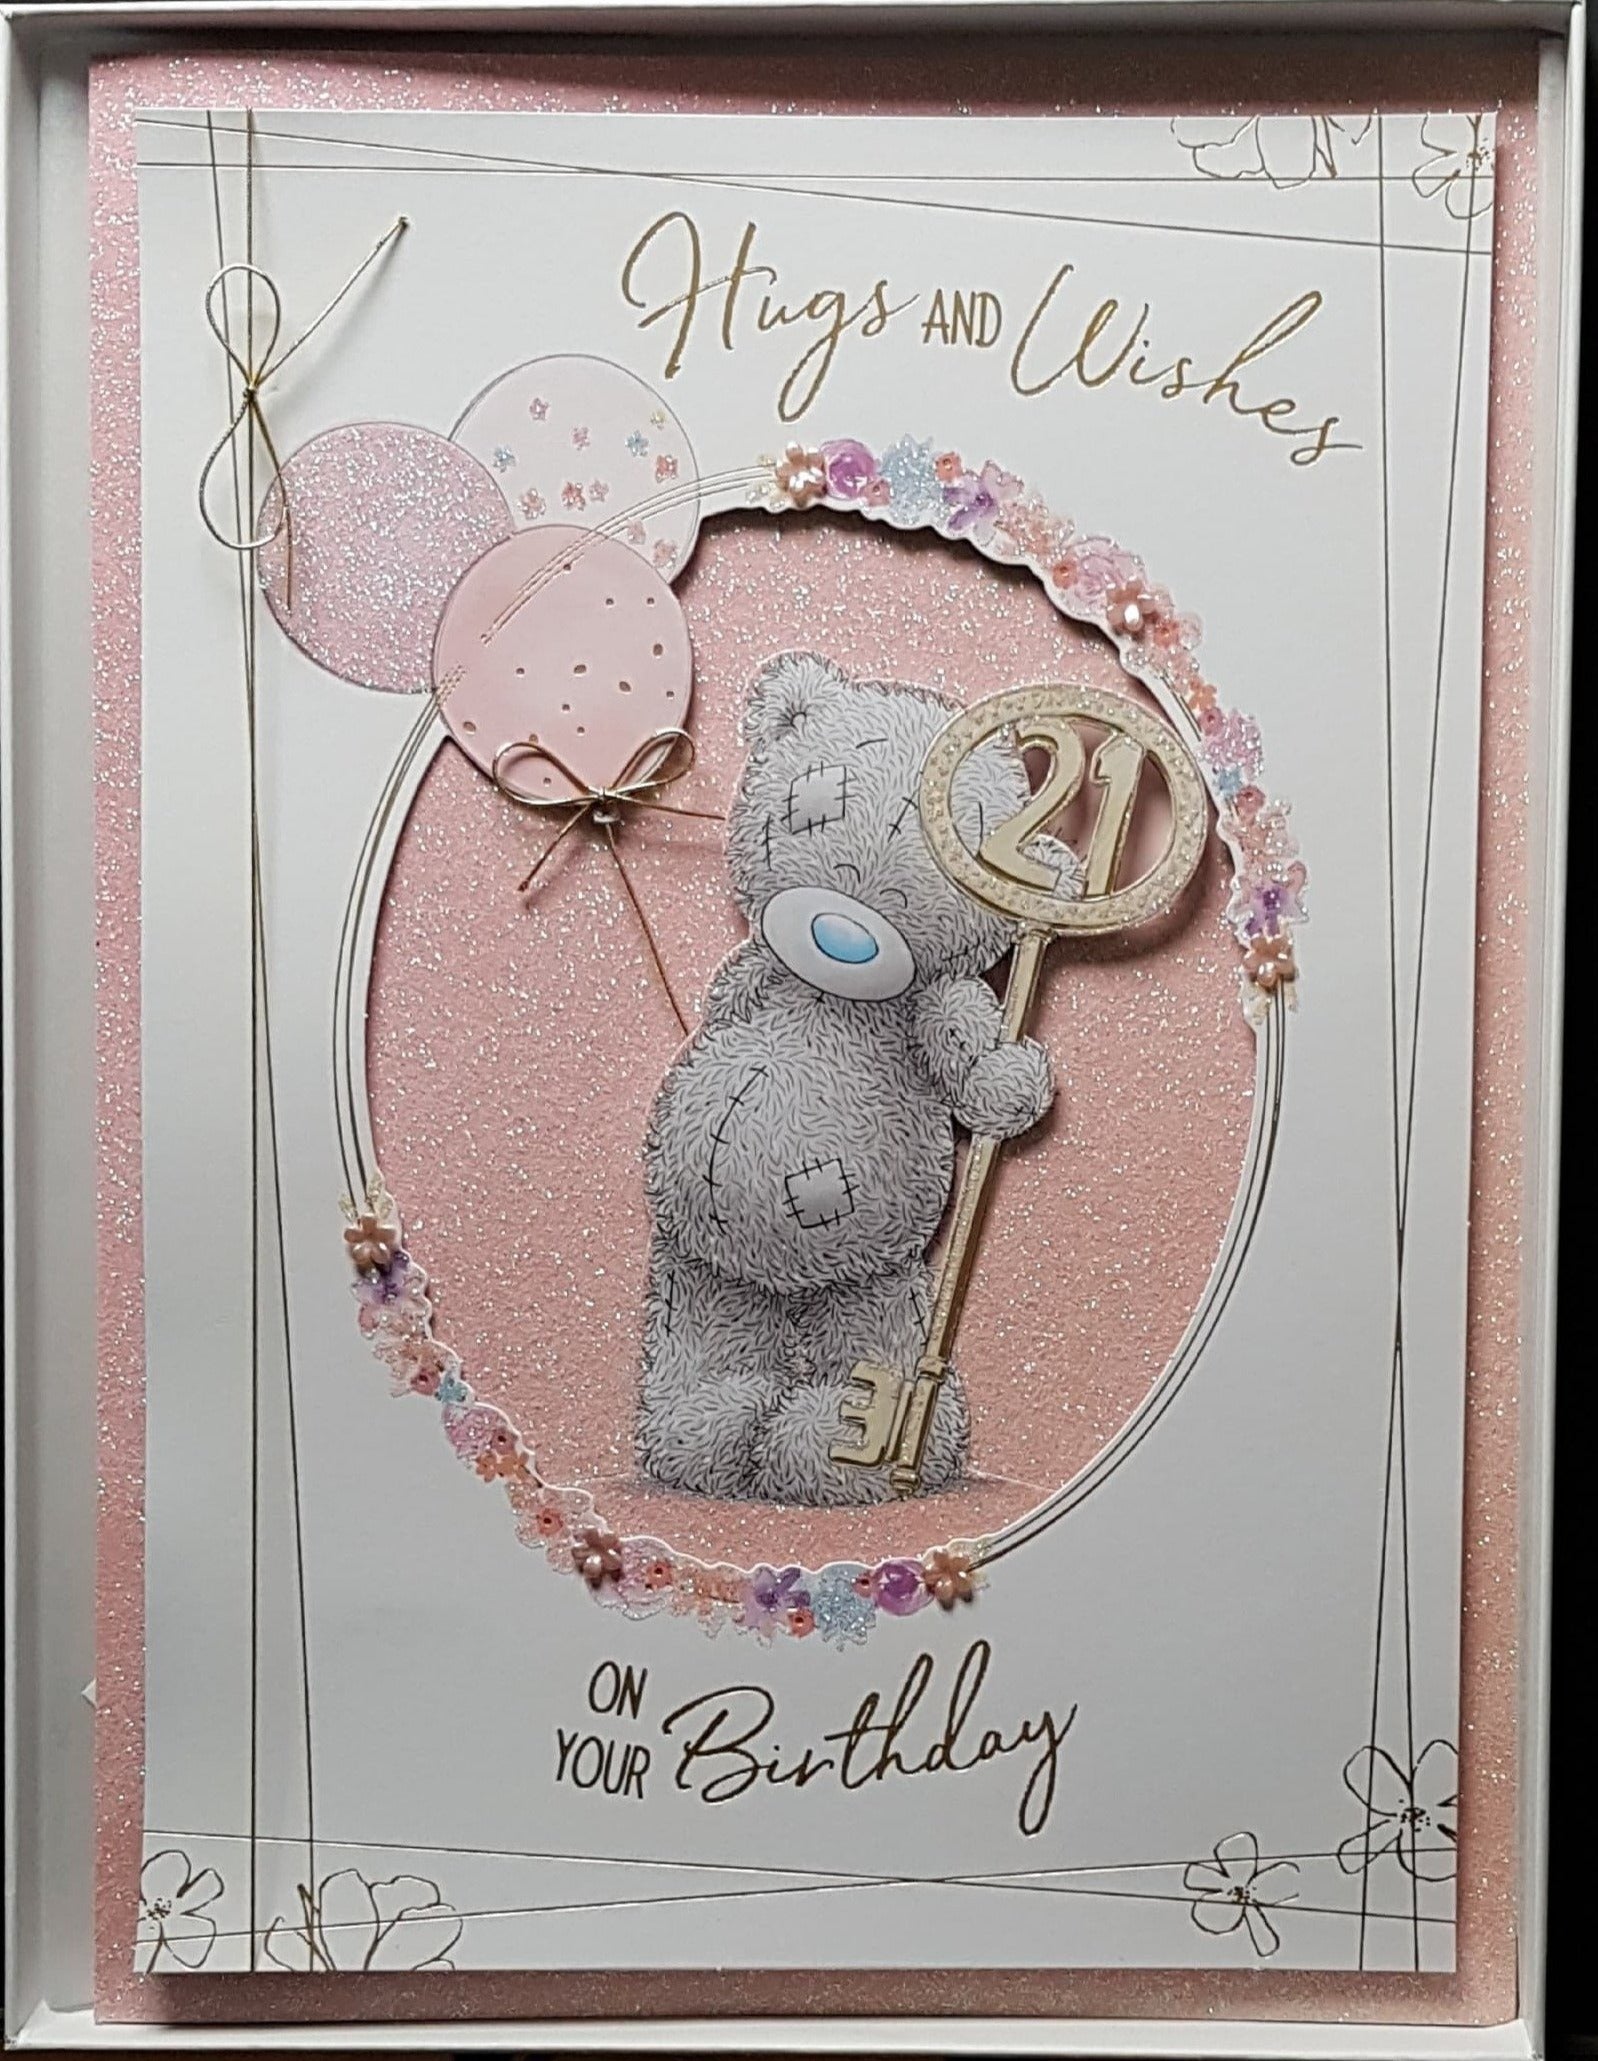 Age 21 Birthday Card - 'Hugs An Wishes...'& A Gold Key (A Card In A Box)